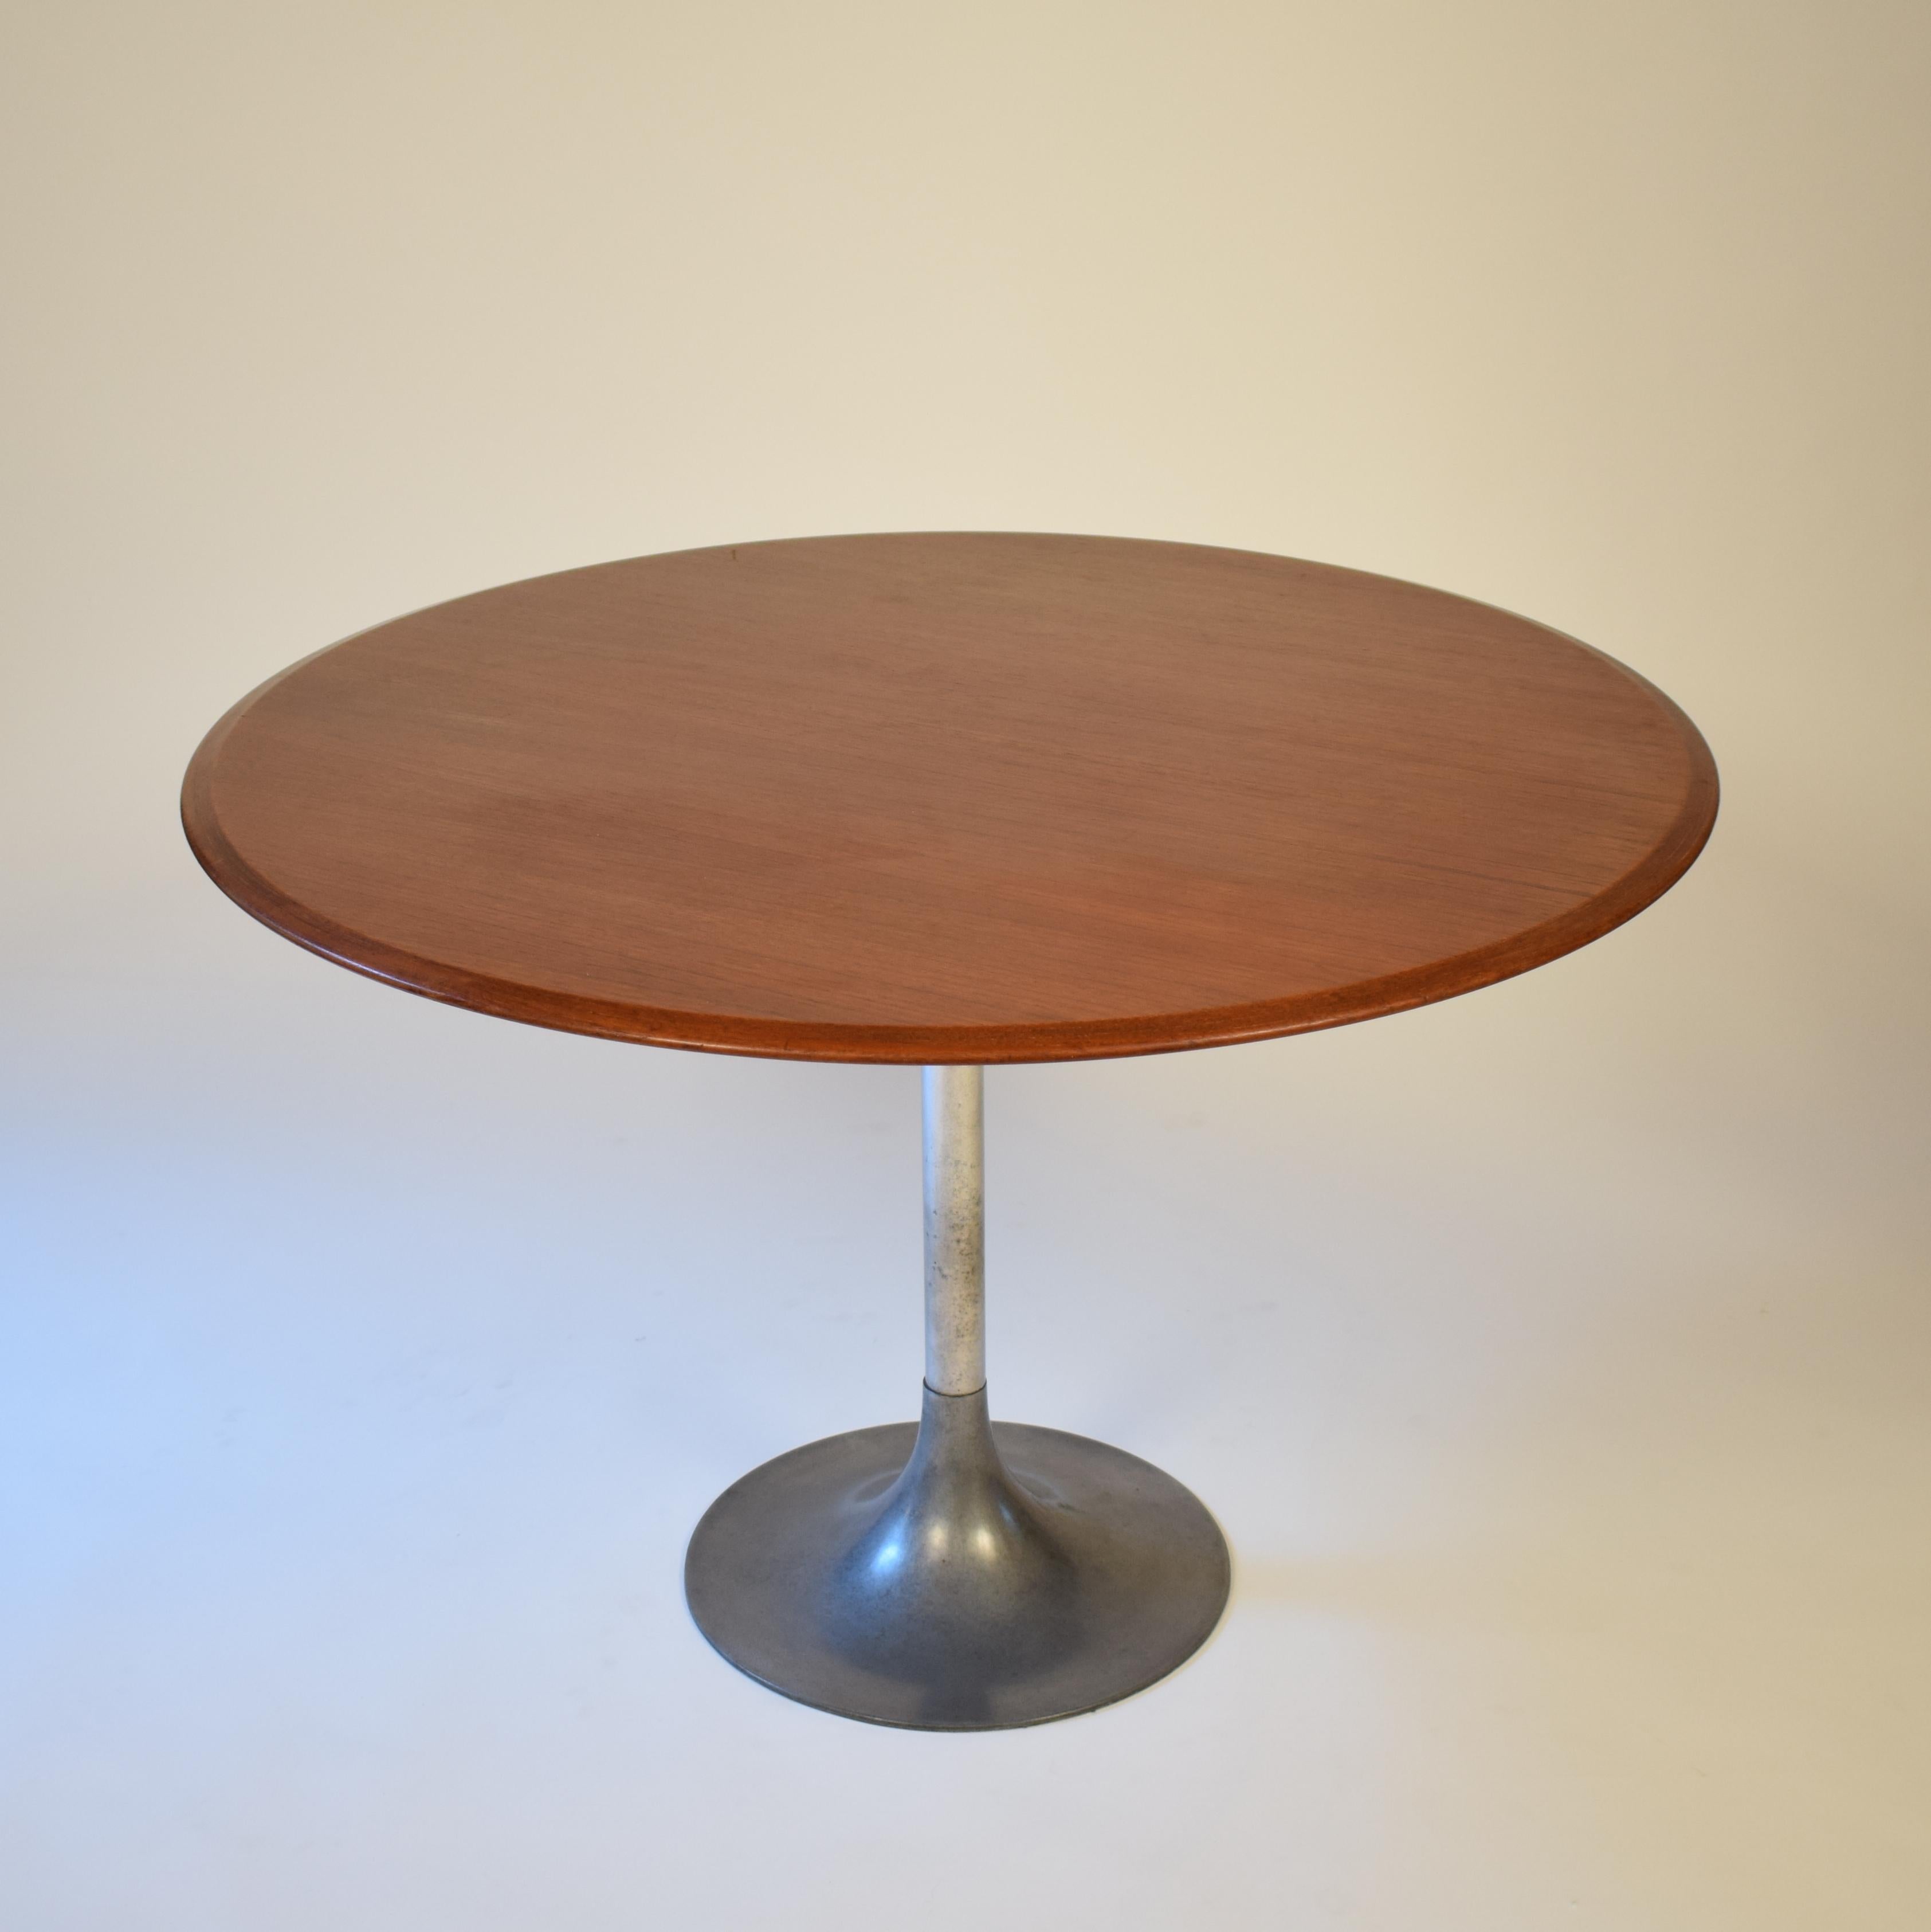 This beautiful Tulip table has got a teak top and the base is made out of metal.
The table has got a great Patina.